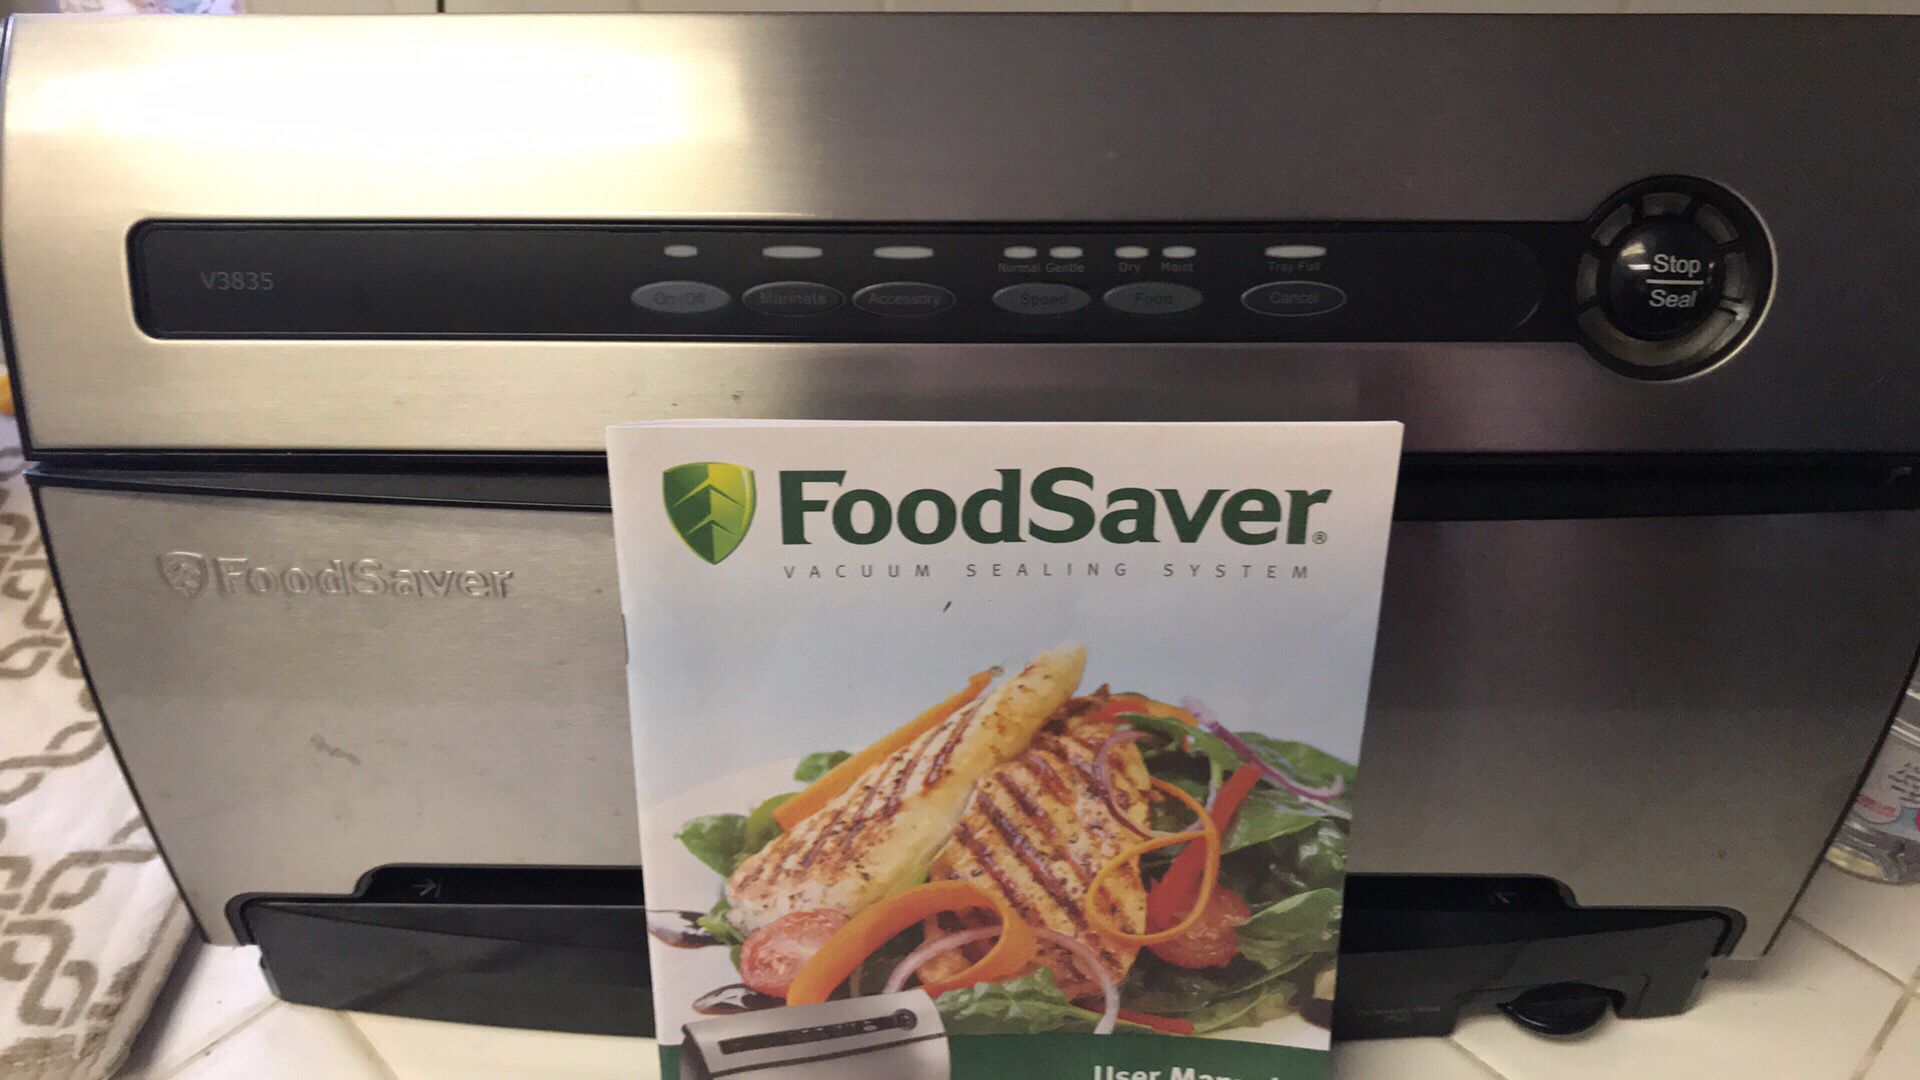 FoodSaver V3835 w accessories and bags